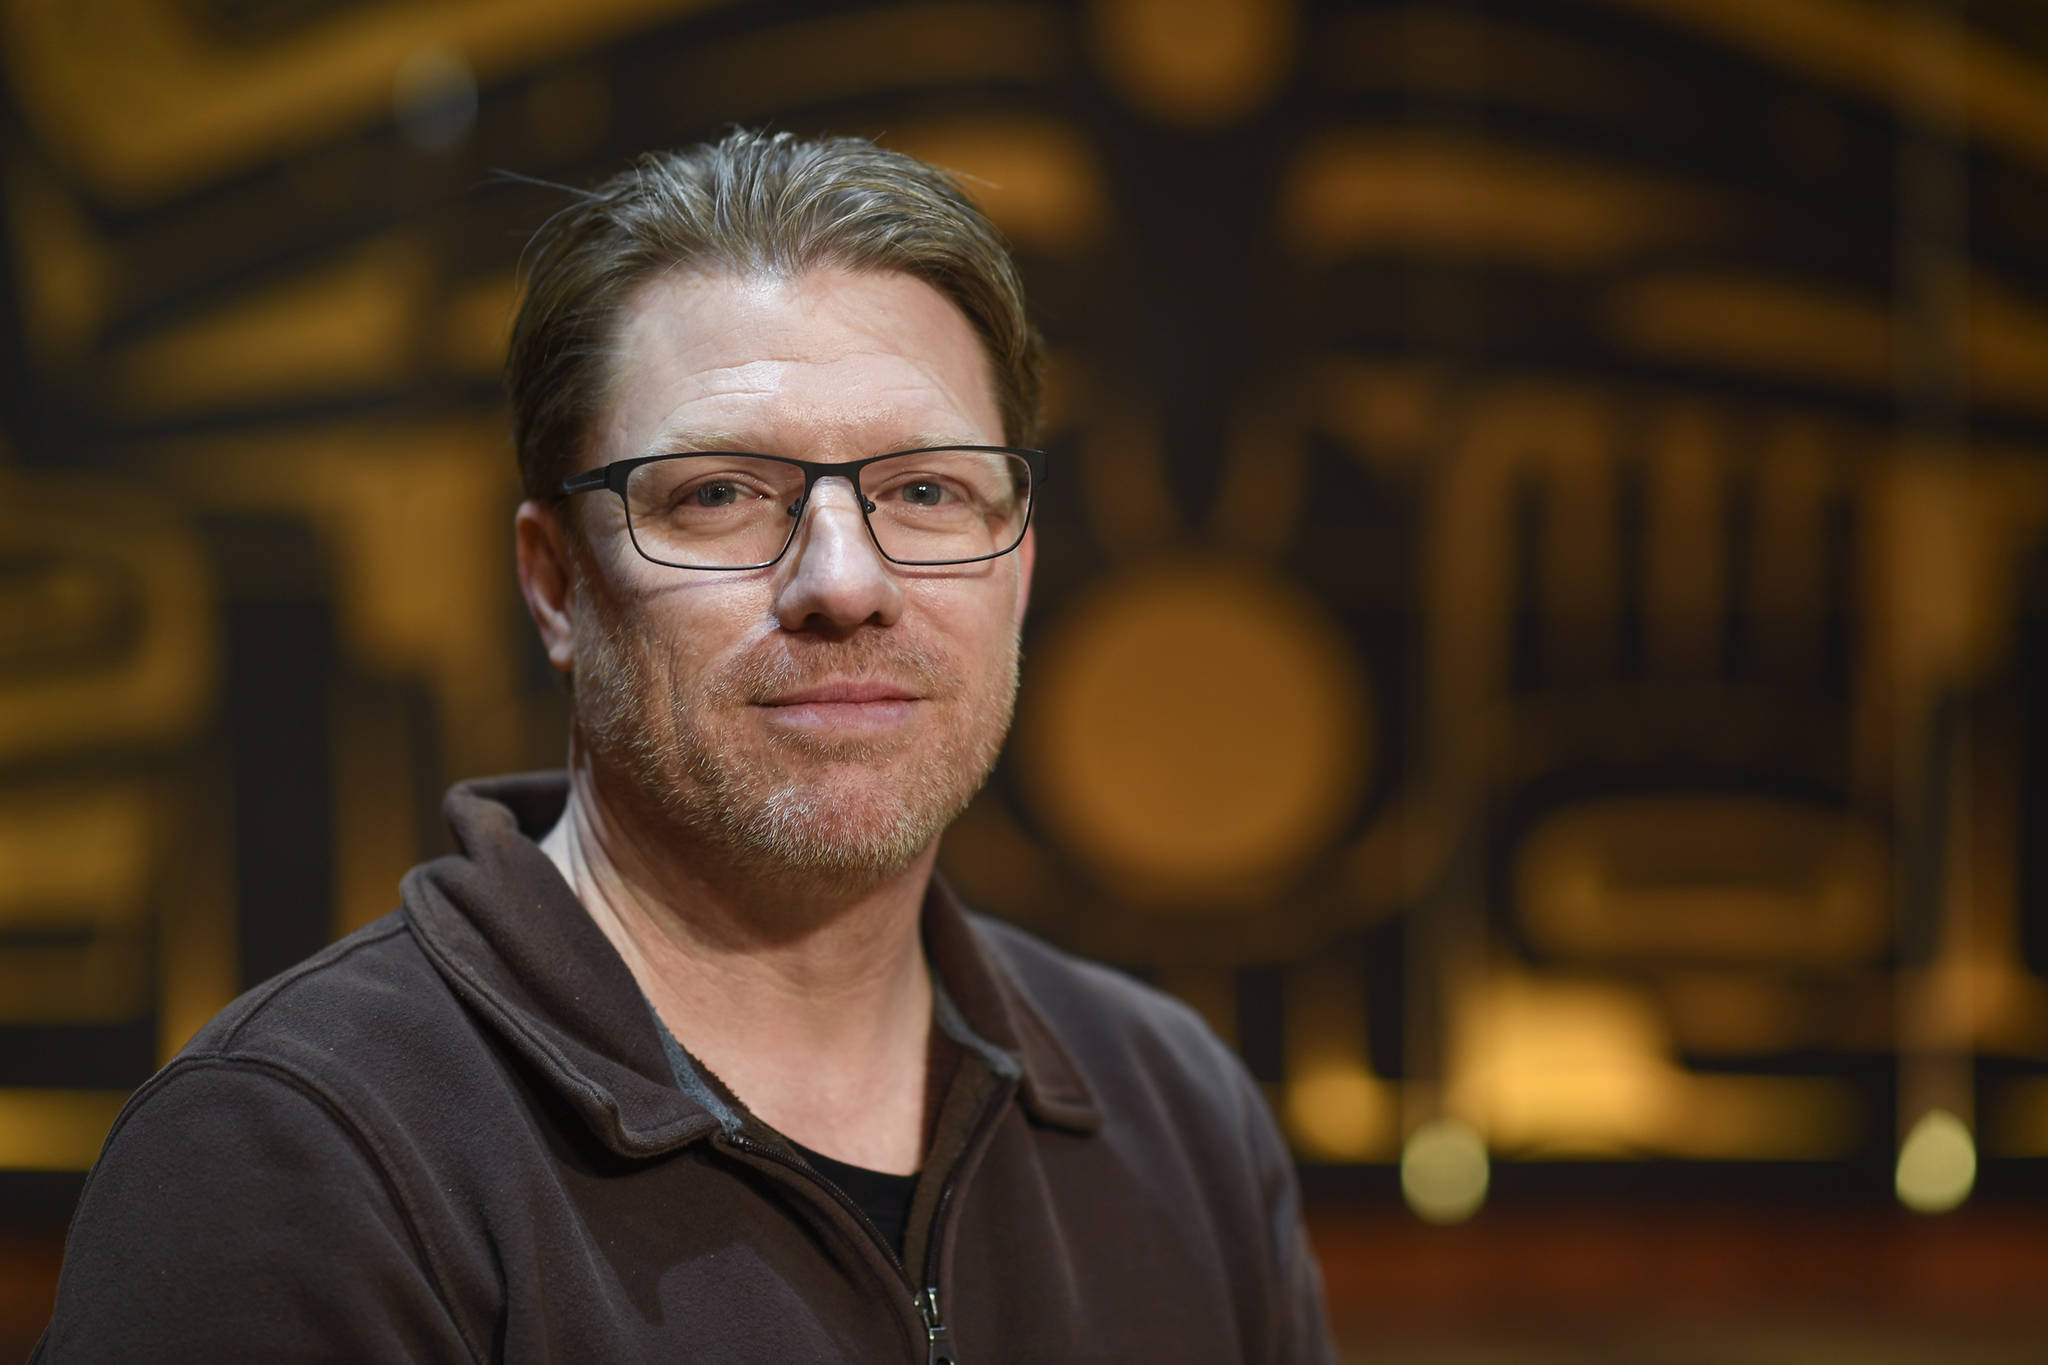 A $12,000 grant awarded to Sealaska Heritage Institute will help it acquire for “Catcher of Souls” by John Hudson III of Metlakatla. Hudson is a Tsimshian carver and arts instructor. (Michael Penn | Juneau Empire File)